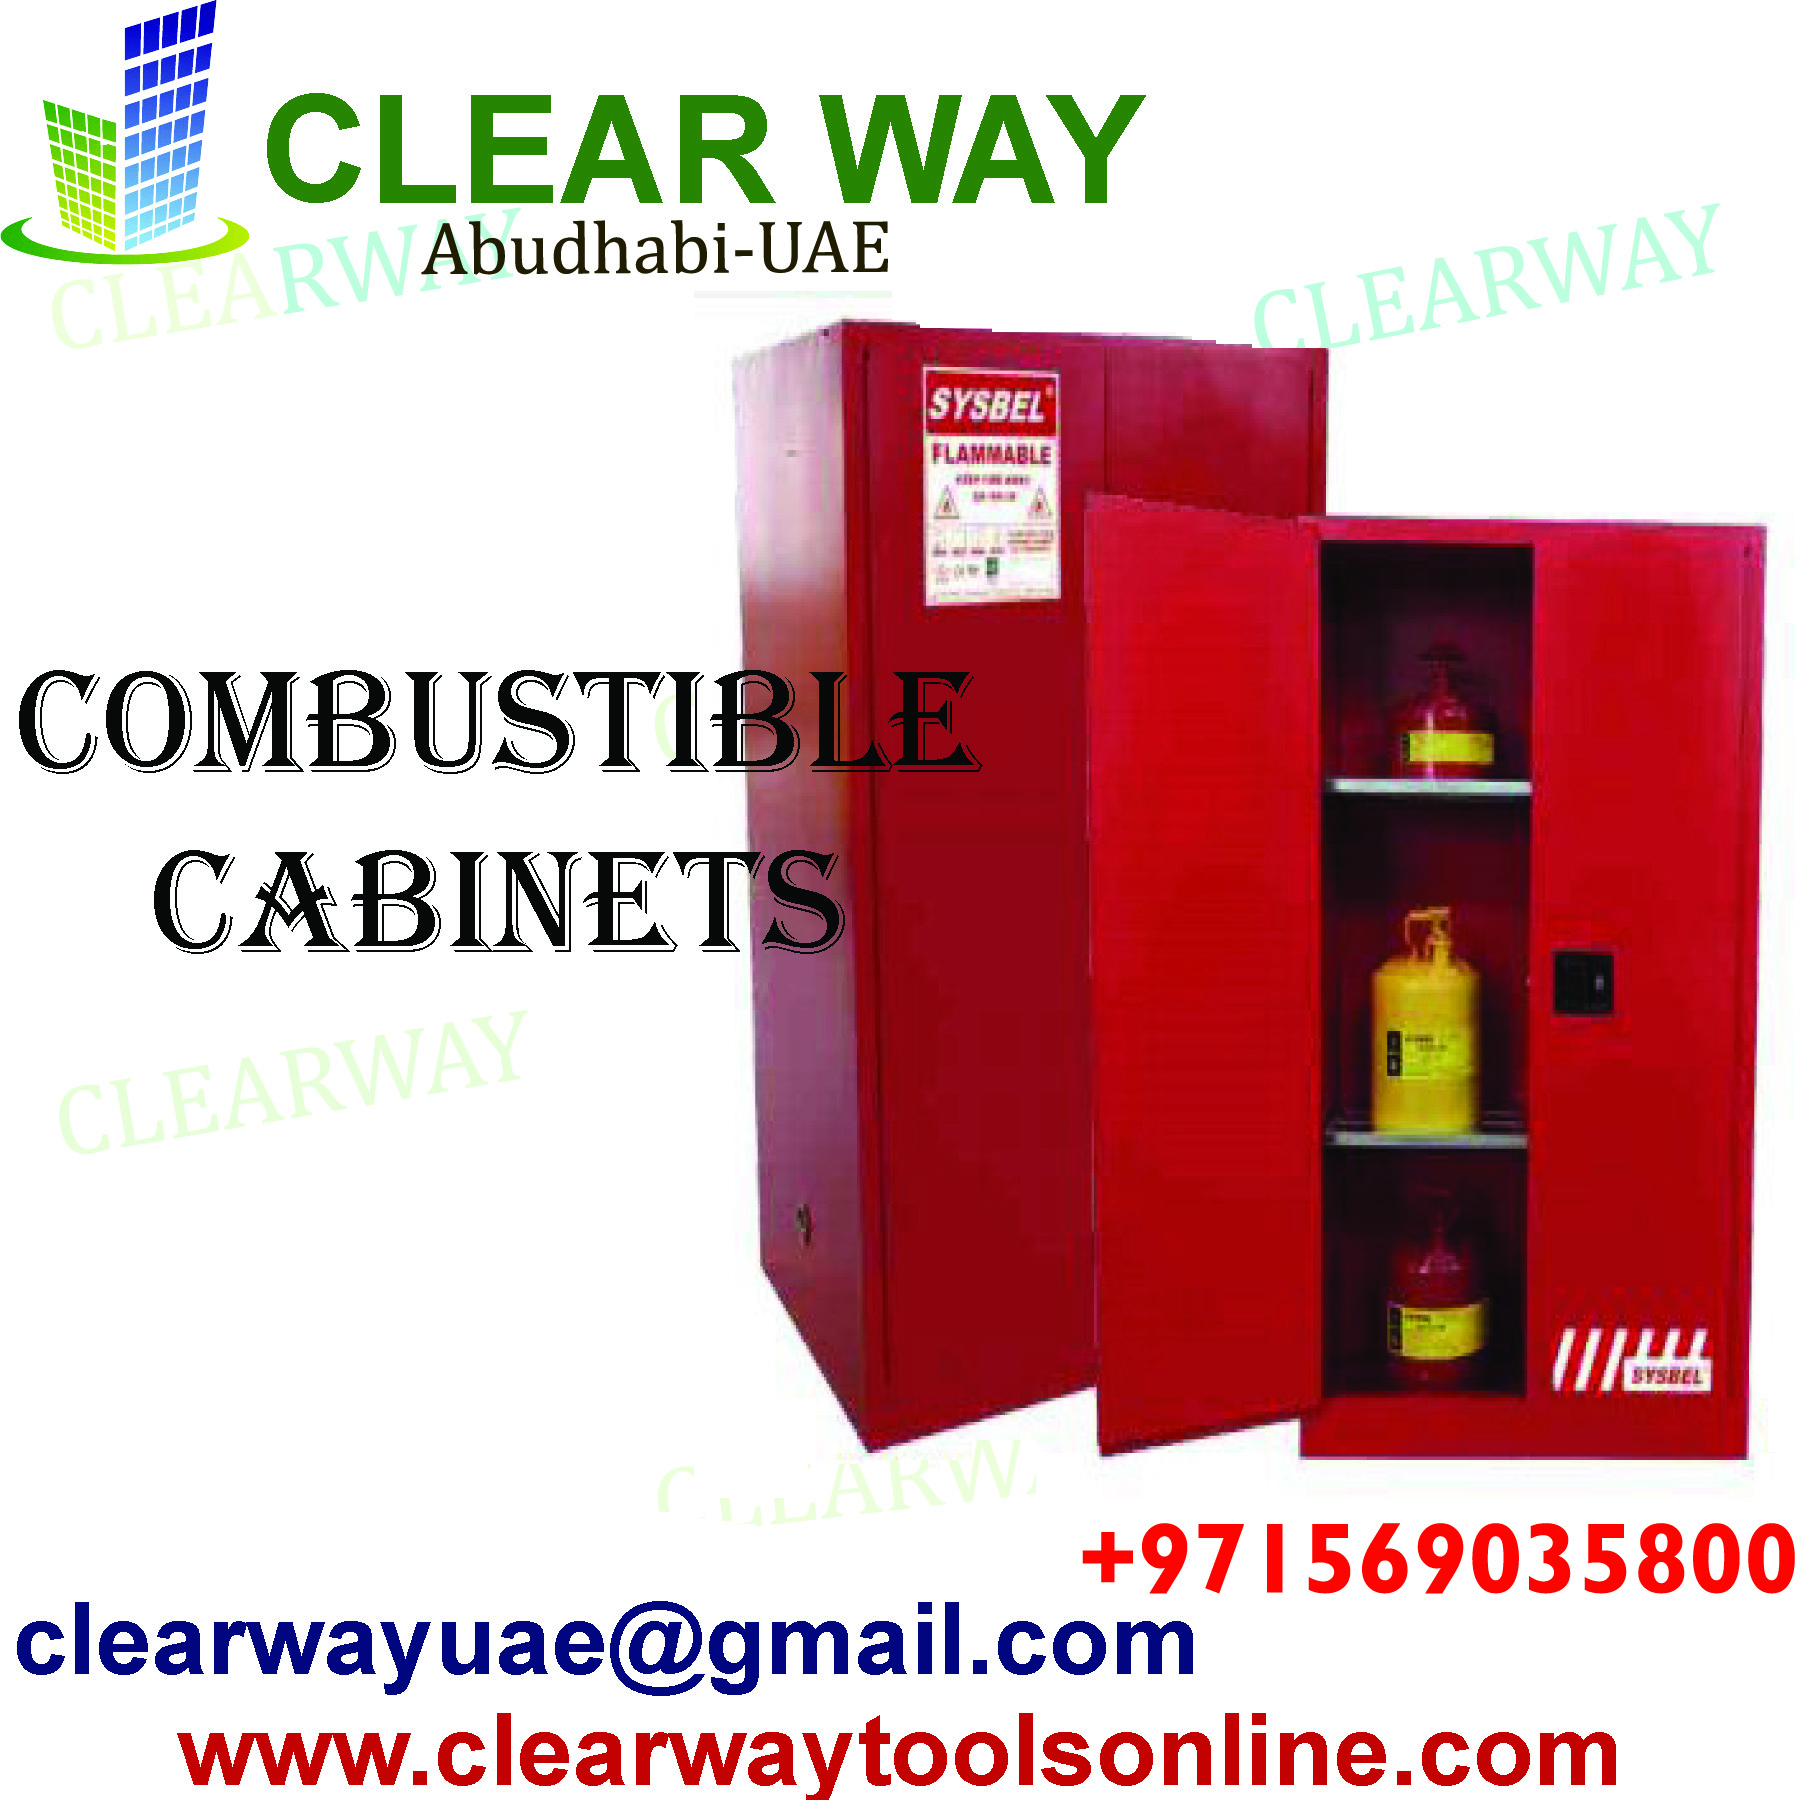 COMBUSTIBLE CABINETS,SYSBEL,CLEARWAY,MUSSAFAH,ABUDHABI,UAE